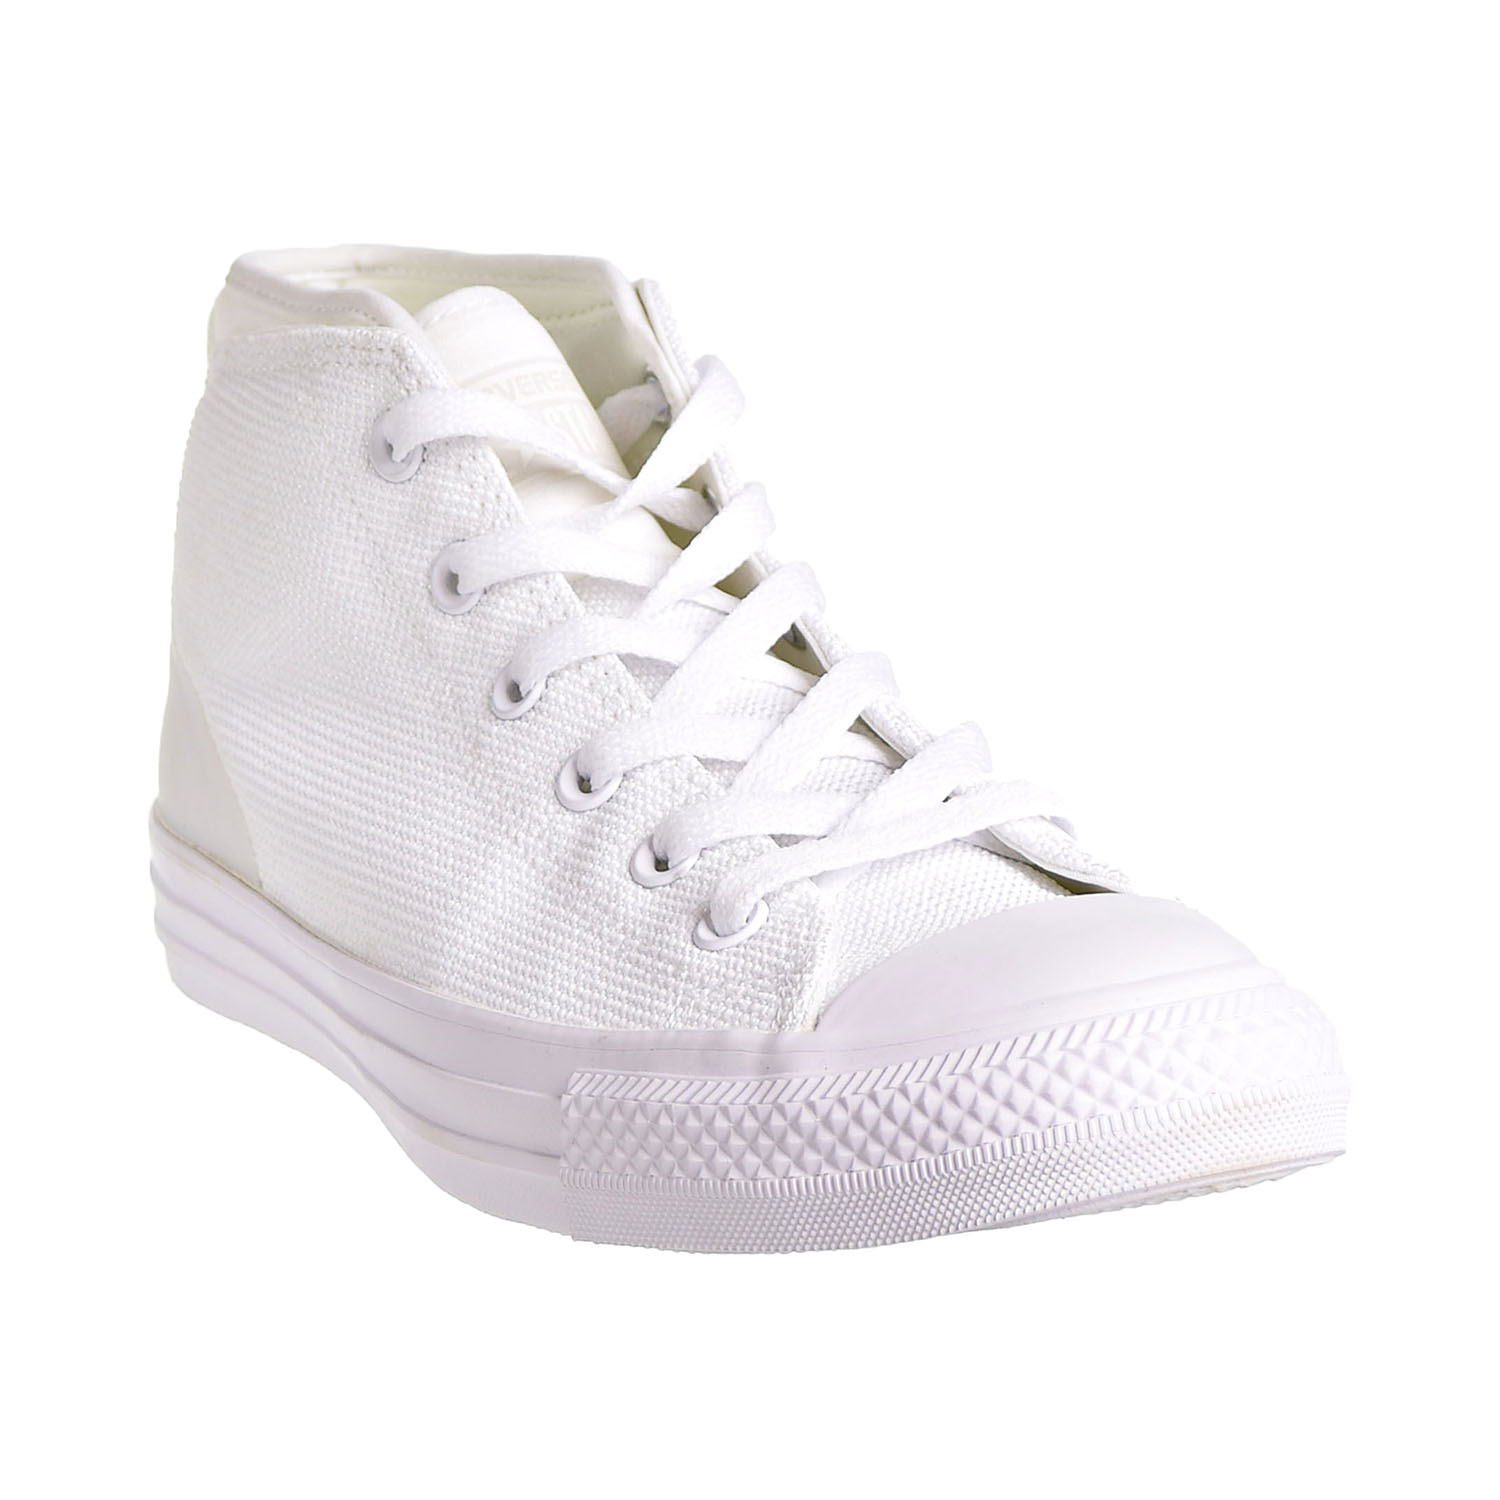 Converse Chuck Taylor All Star Syde Street Men's Shoes White-White 155490c - image 2 of 6